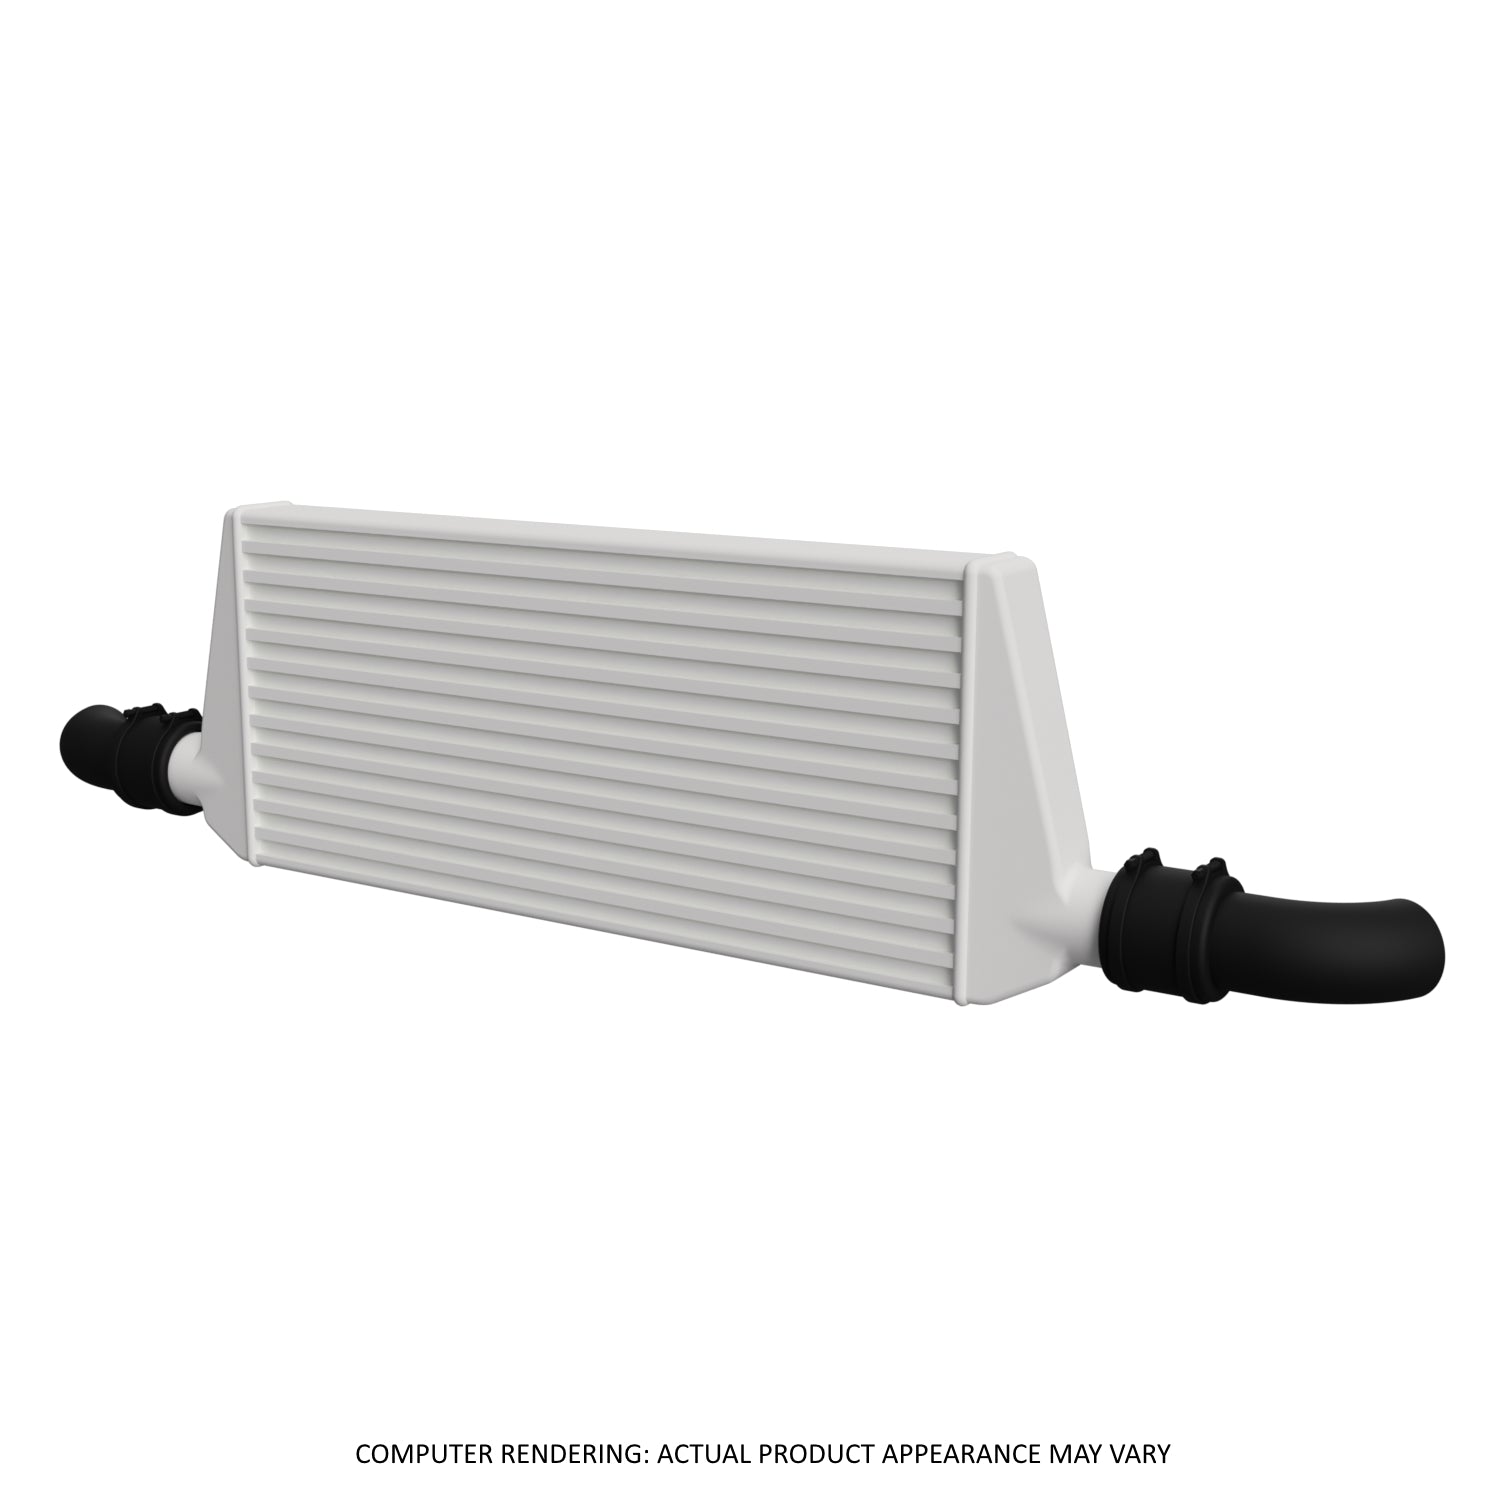 Make It RC LI-1 Intercooler for 1/10 Scale RC Car and Truck